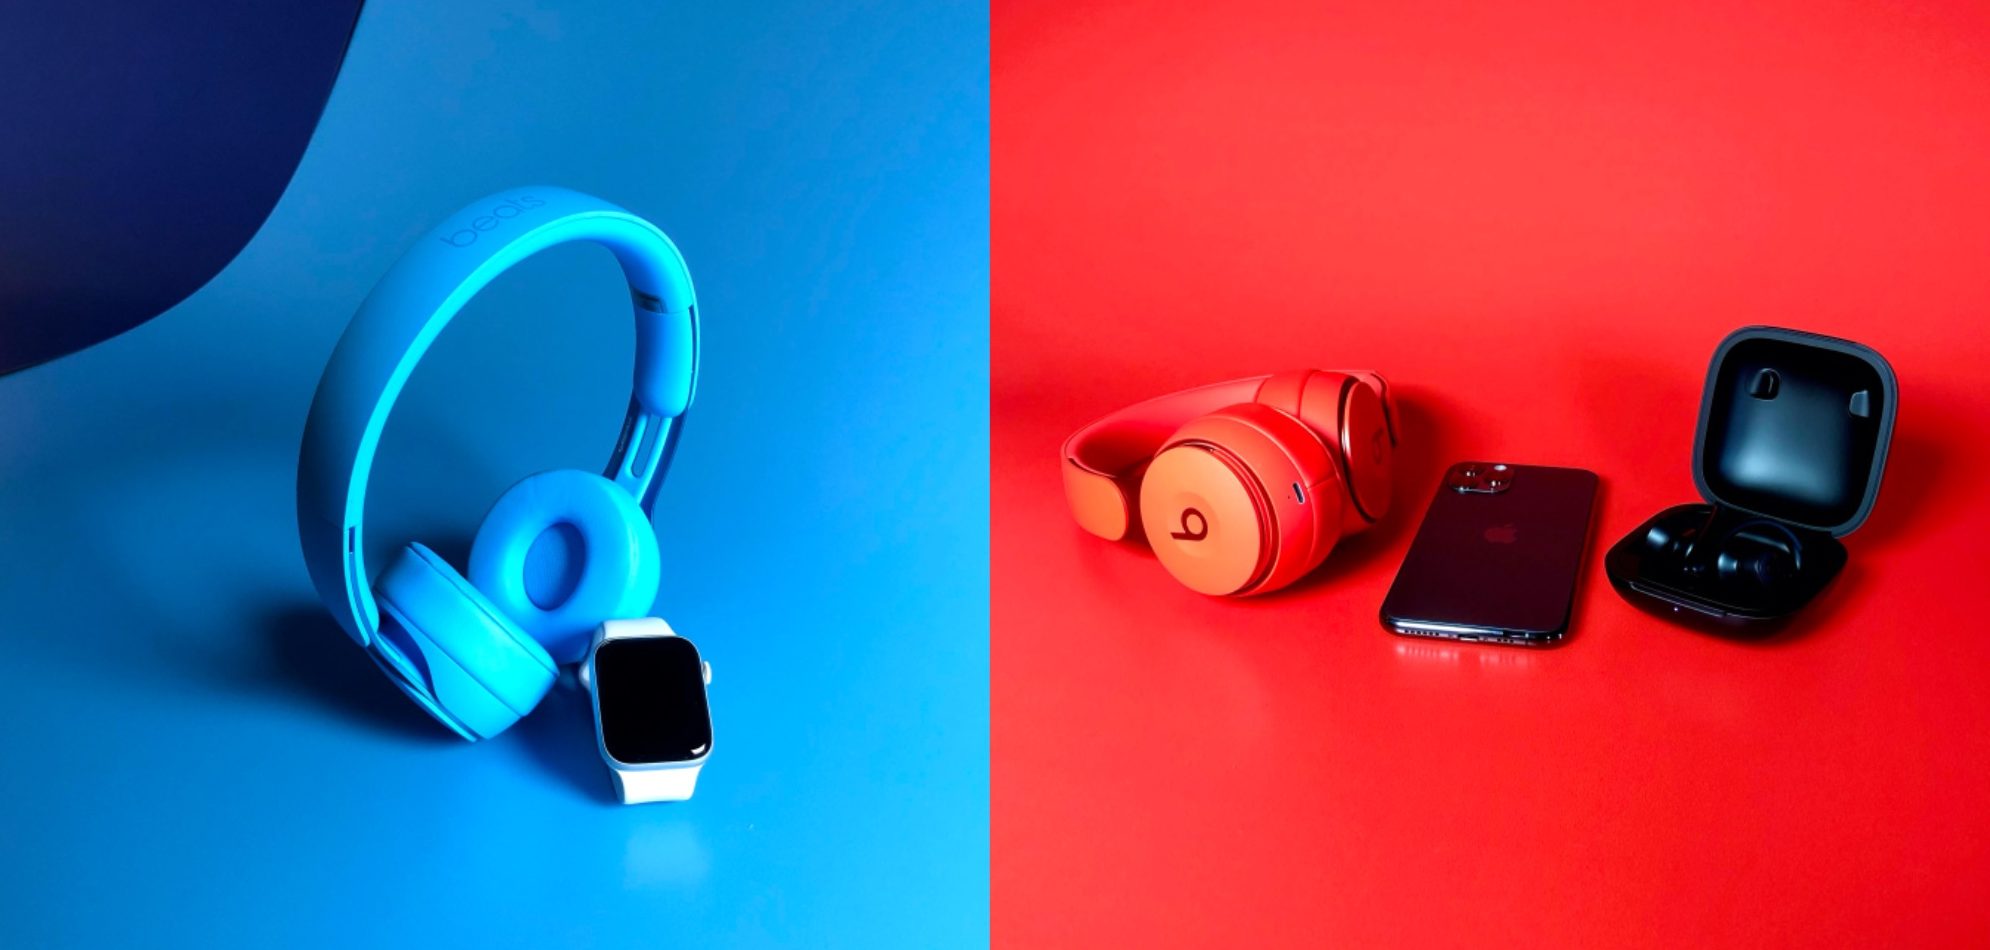 Review: Beats Solo Pro on-ear headphones blend AirPods features